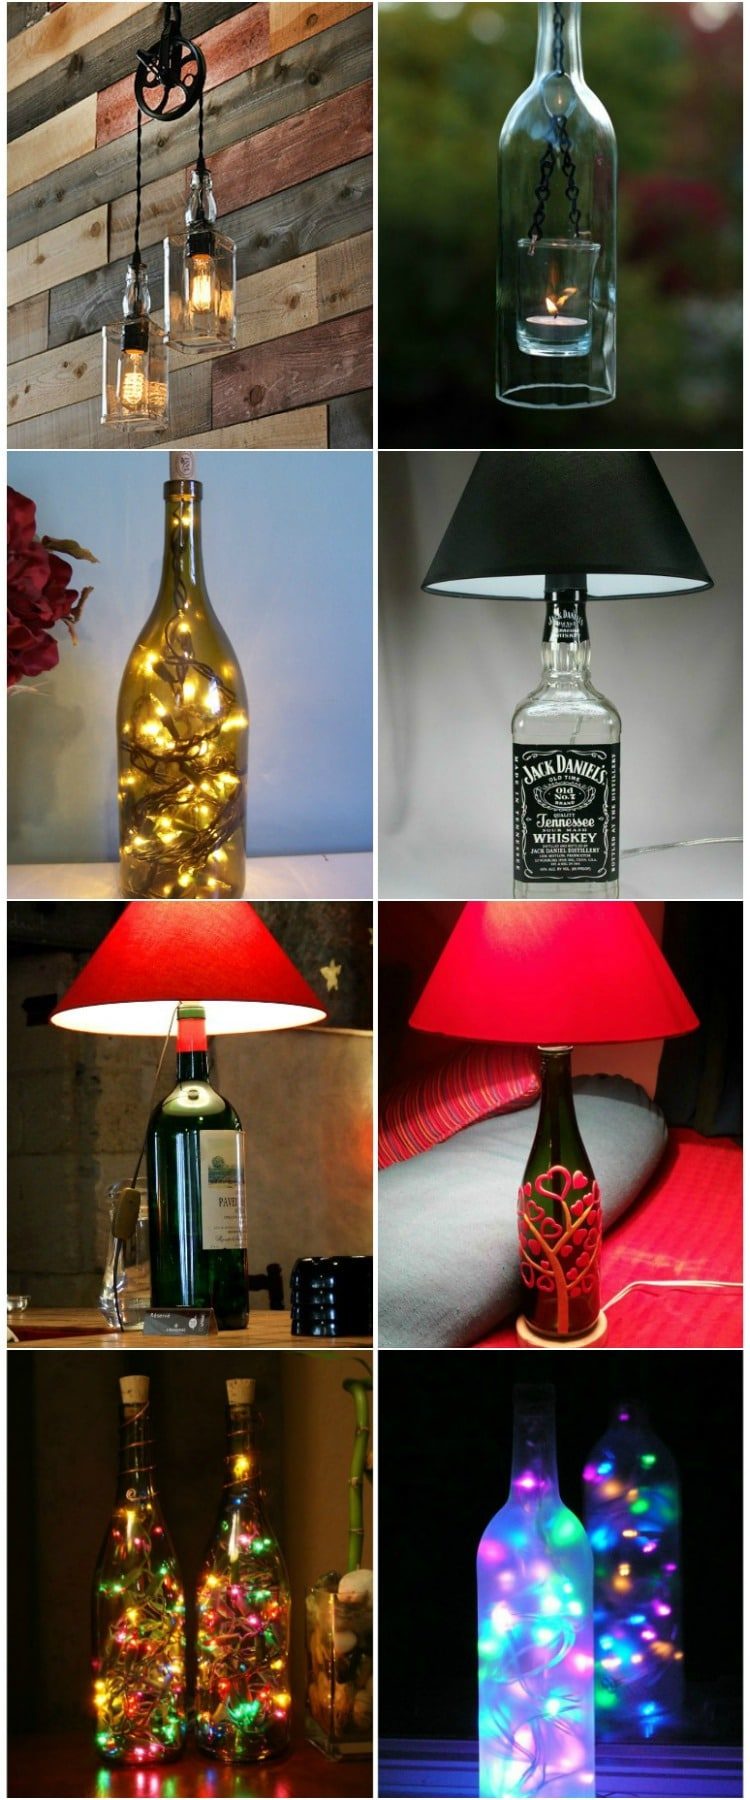 DIY Bottle Lamp: Make a Table Lamp with Recycled Bottles